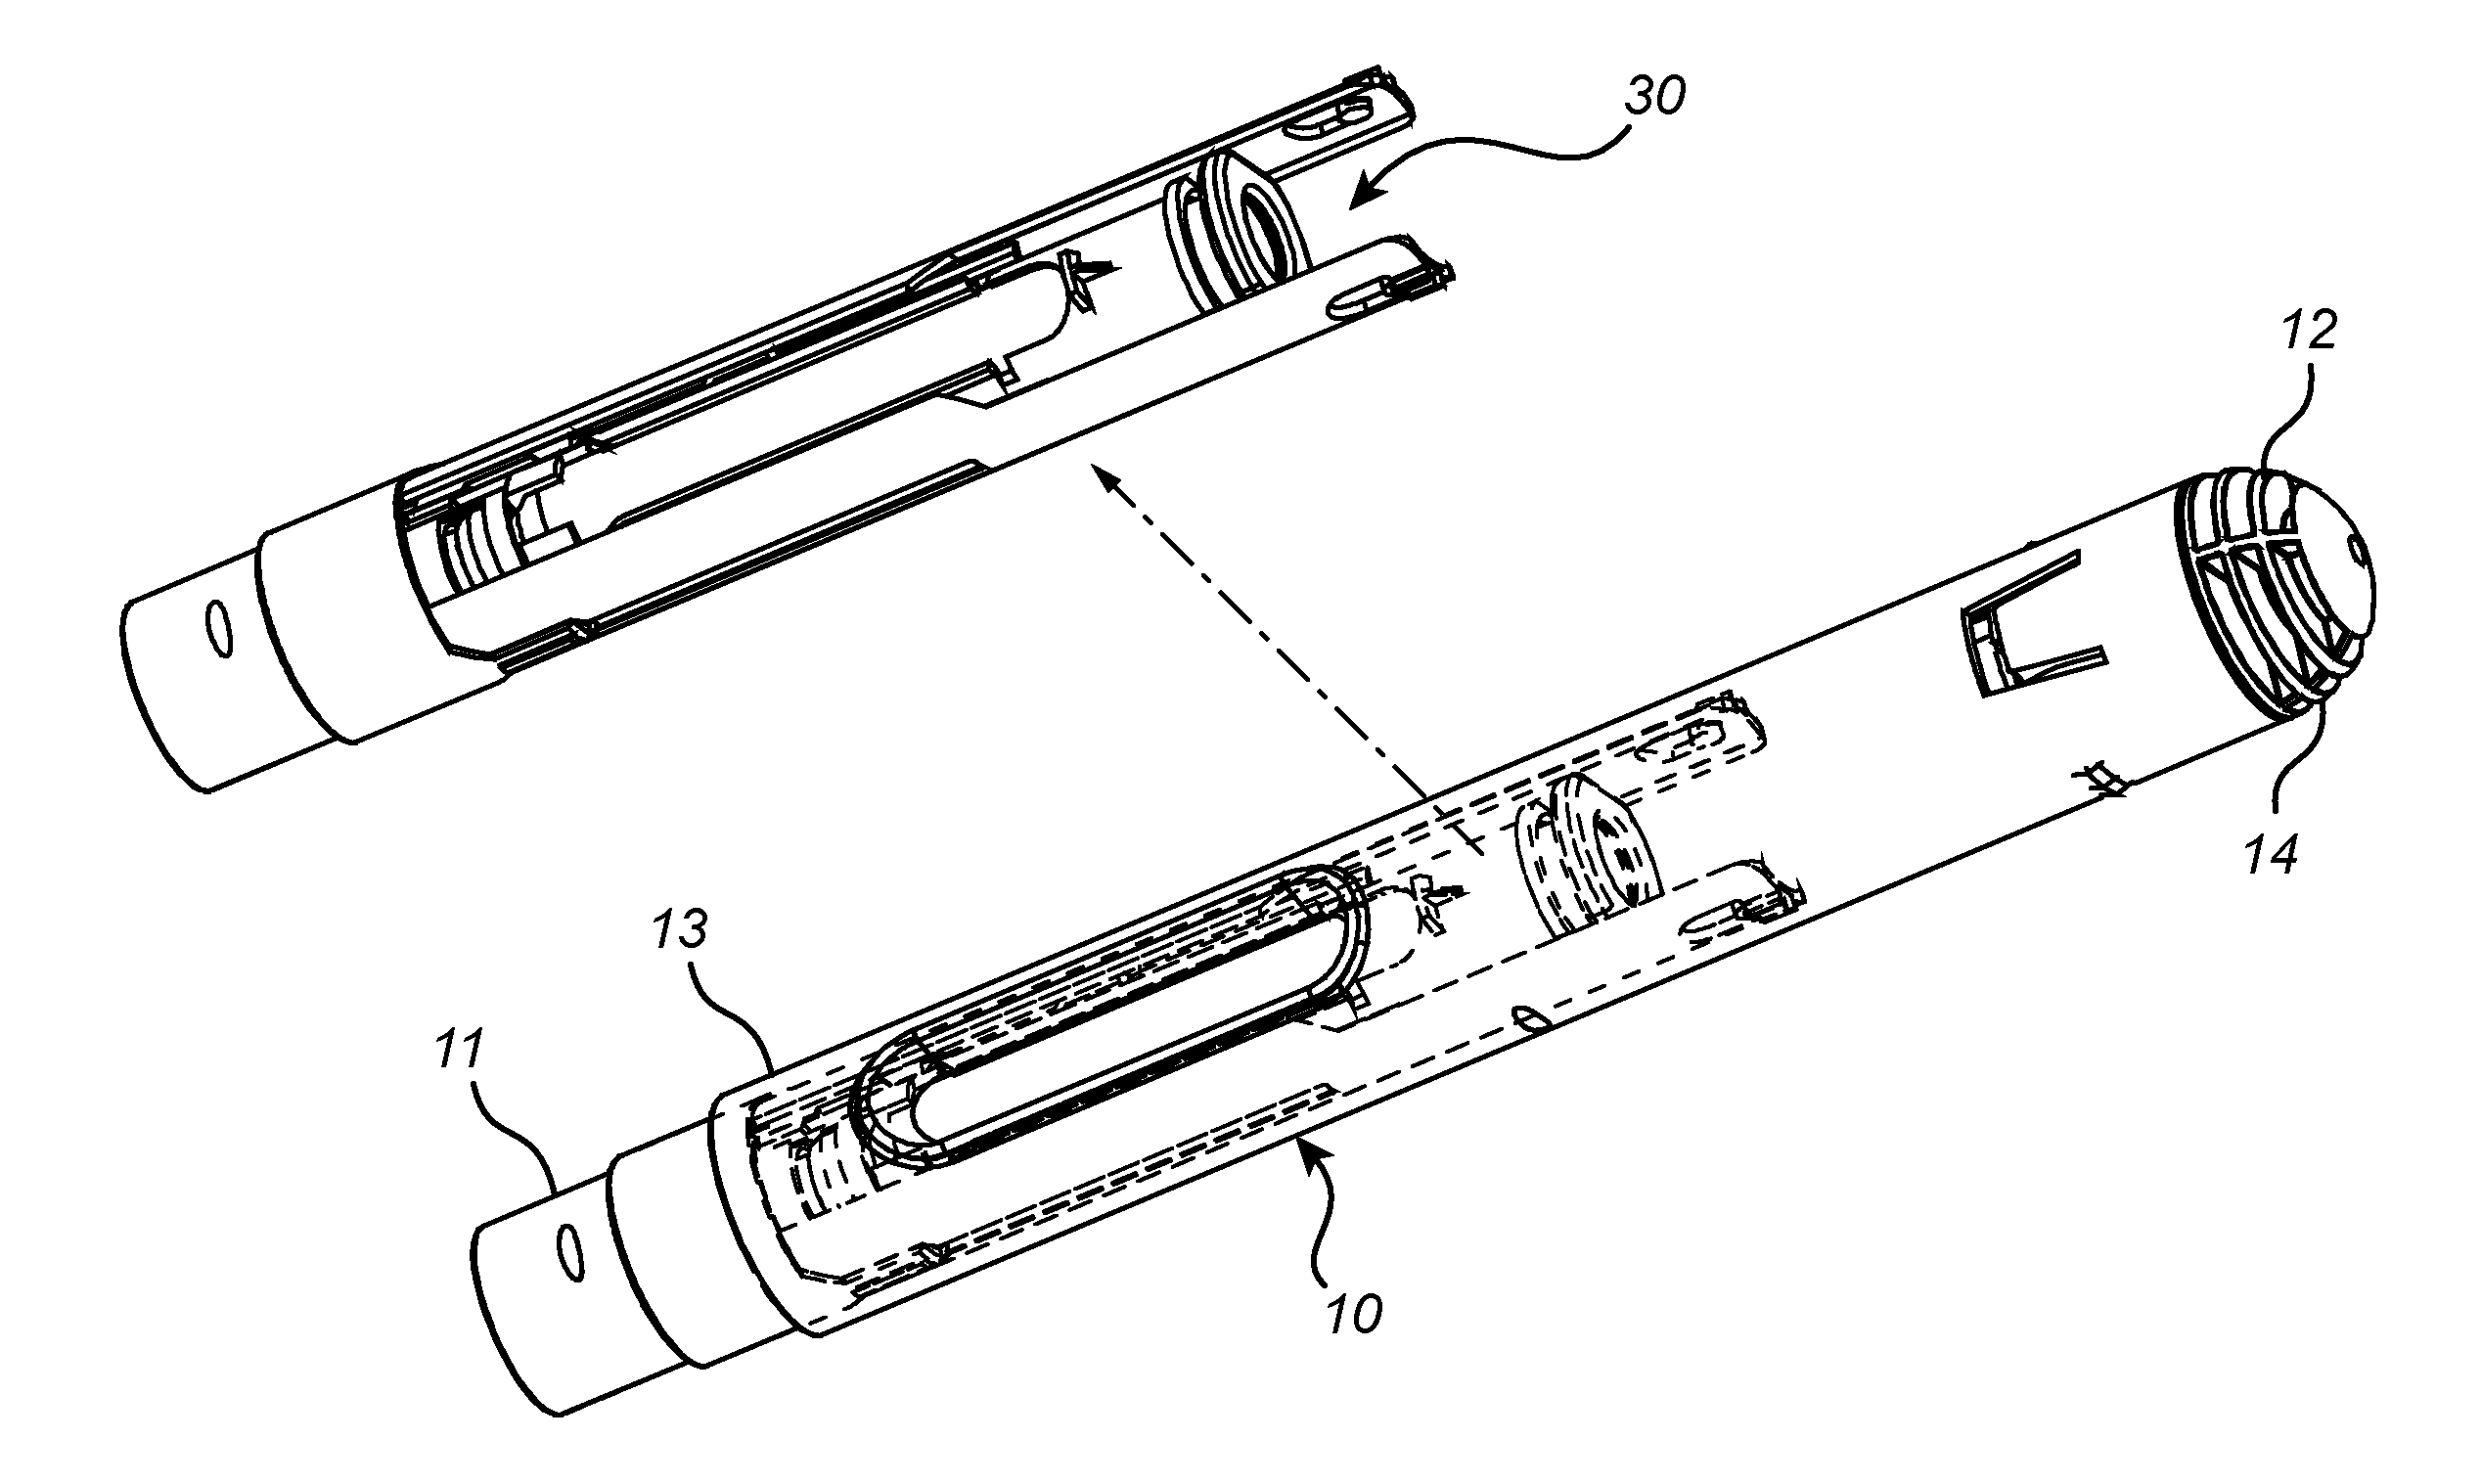 Auto-Injection Device